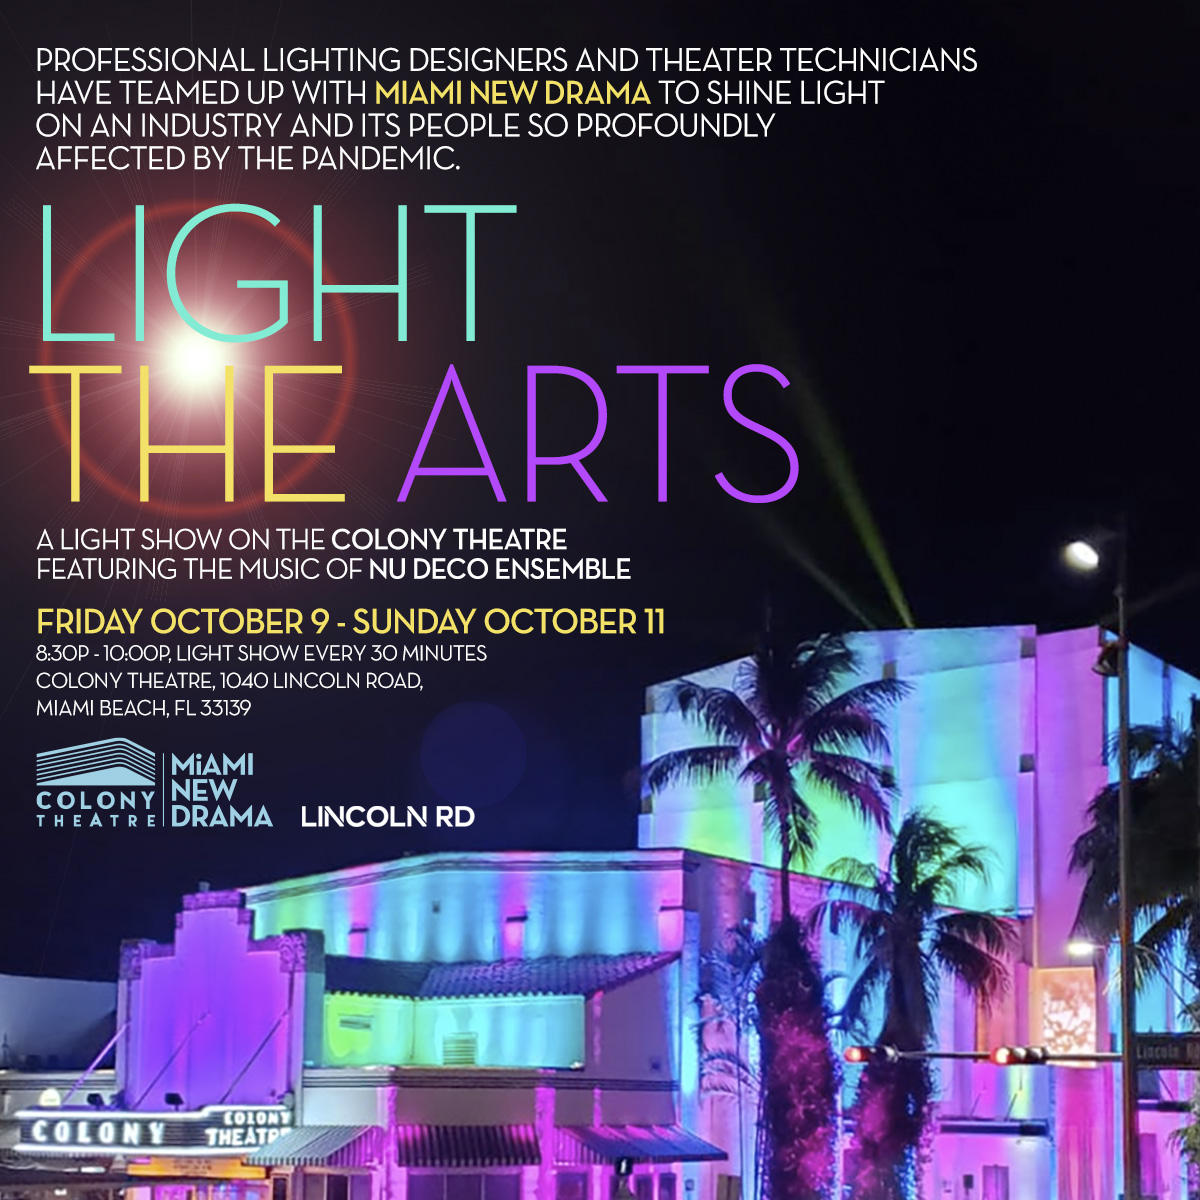 Tonight’s the night! Join us on @LncolnRd for LIGHT THE ARTS from 8:30p - 10:00p! Miami New Drama lights up the Colony Theatre every thirty minutes and features NEW music from @NuDecoEnsemble! Let’s show up for the arts during these difficult times! #LightTheArts